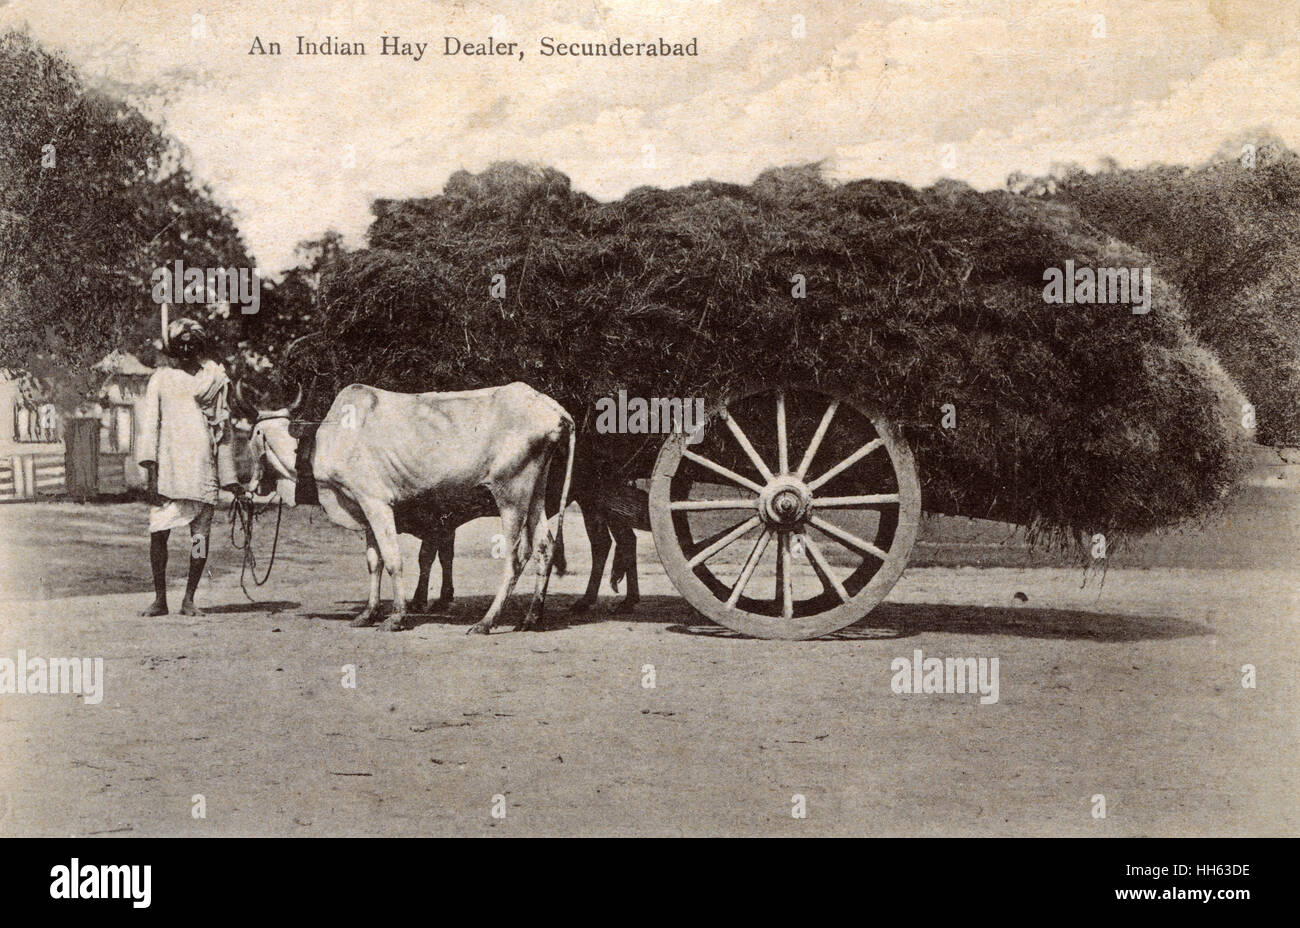 Indian hay dealer and cart, Secunderabad, India Stock Photo